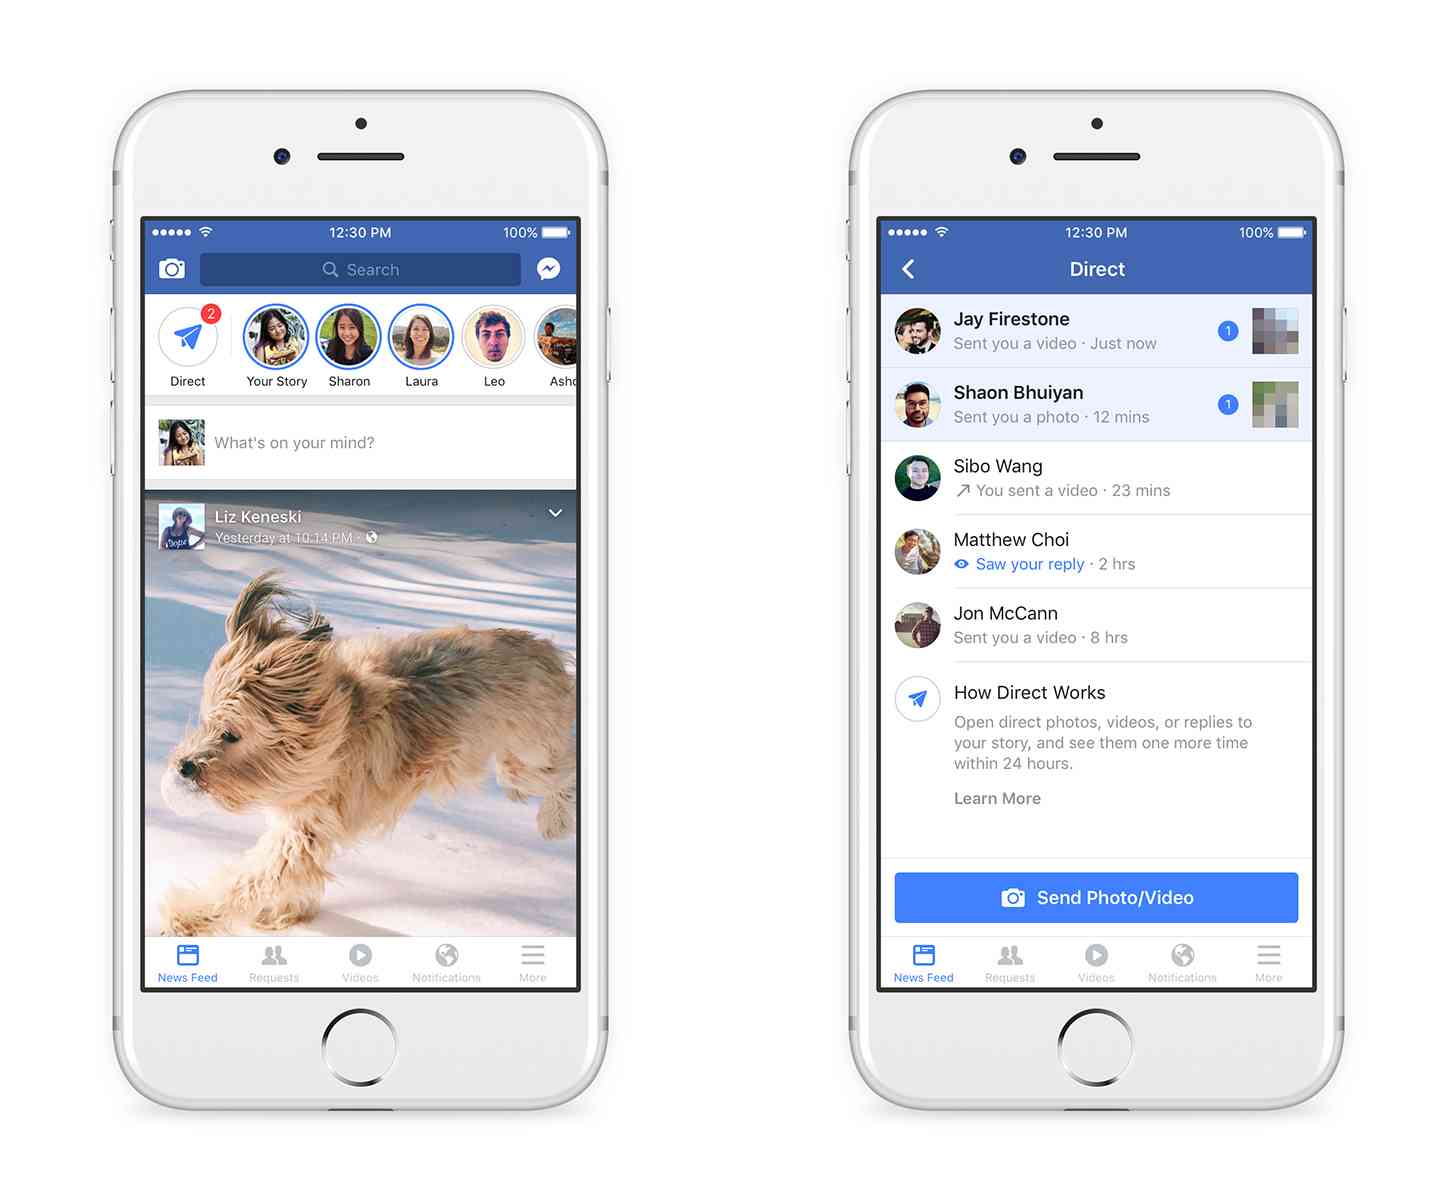 Facebook Stories and Direct features official